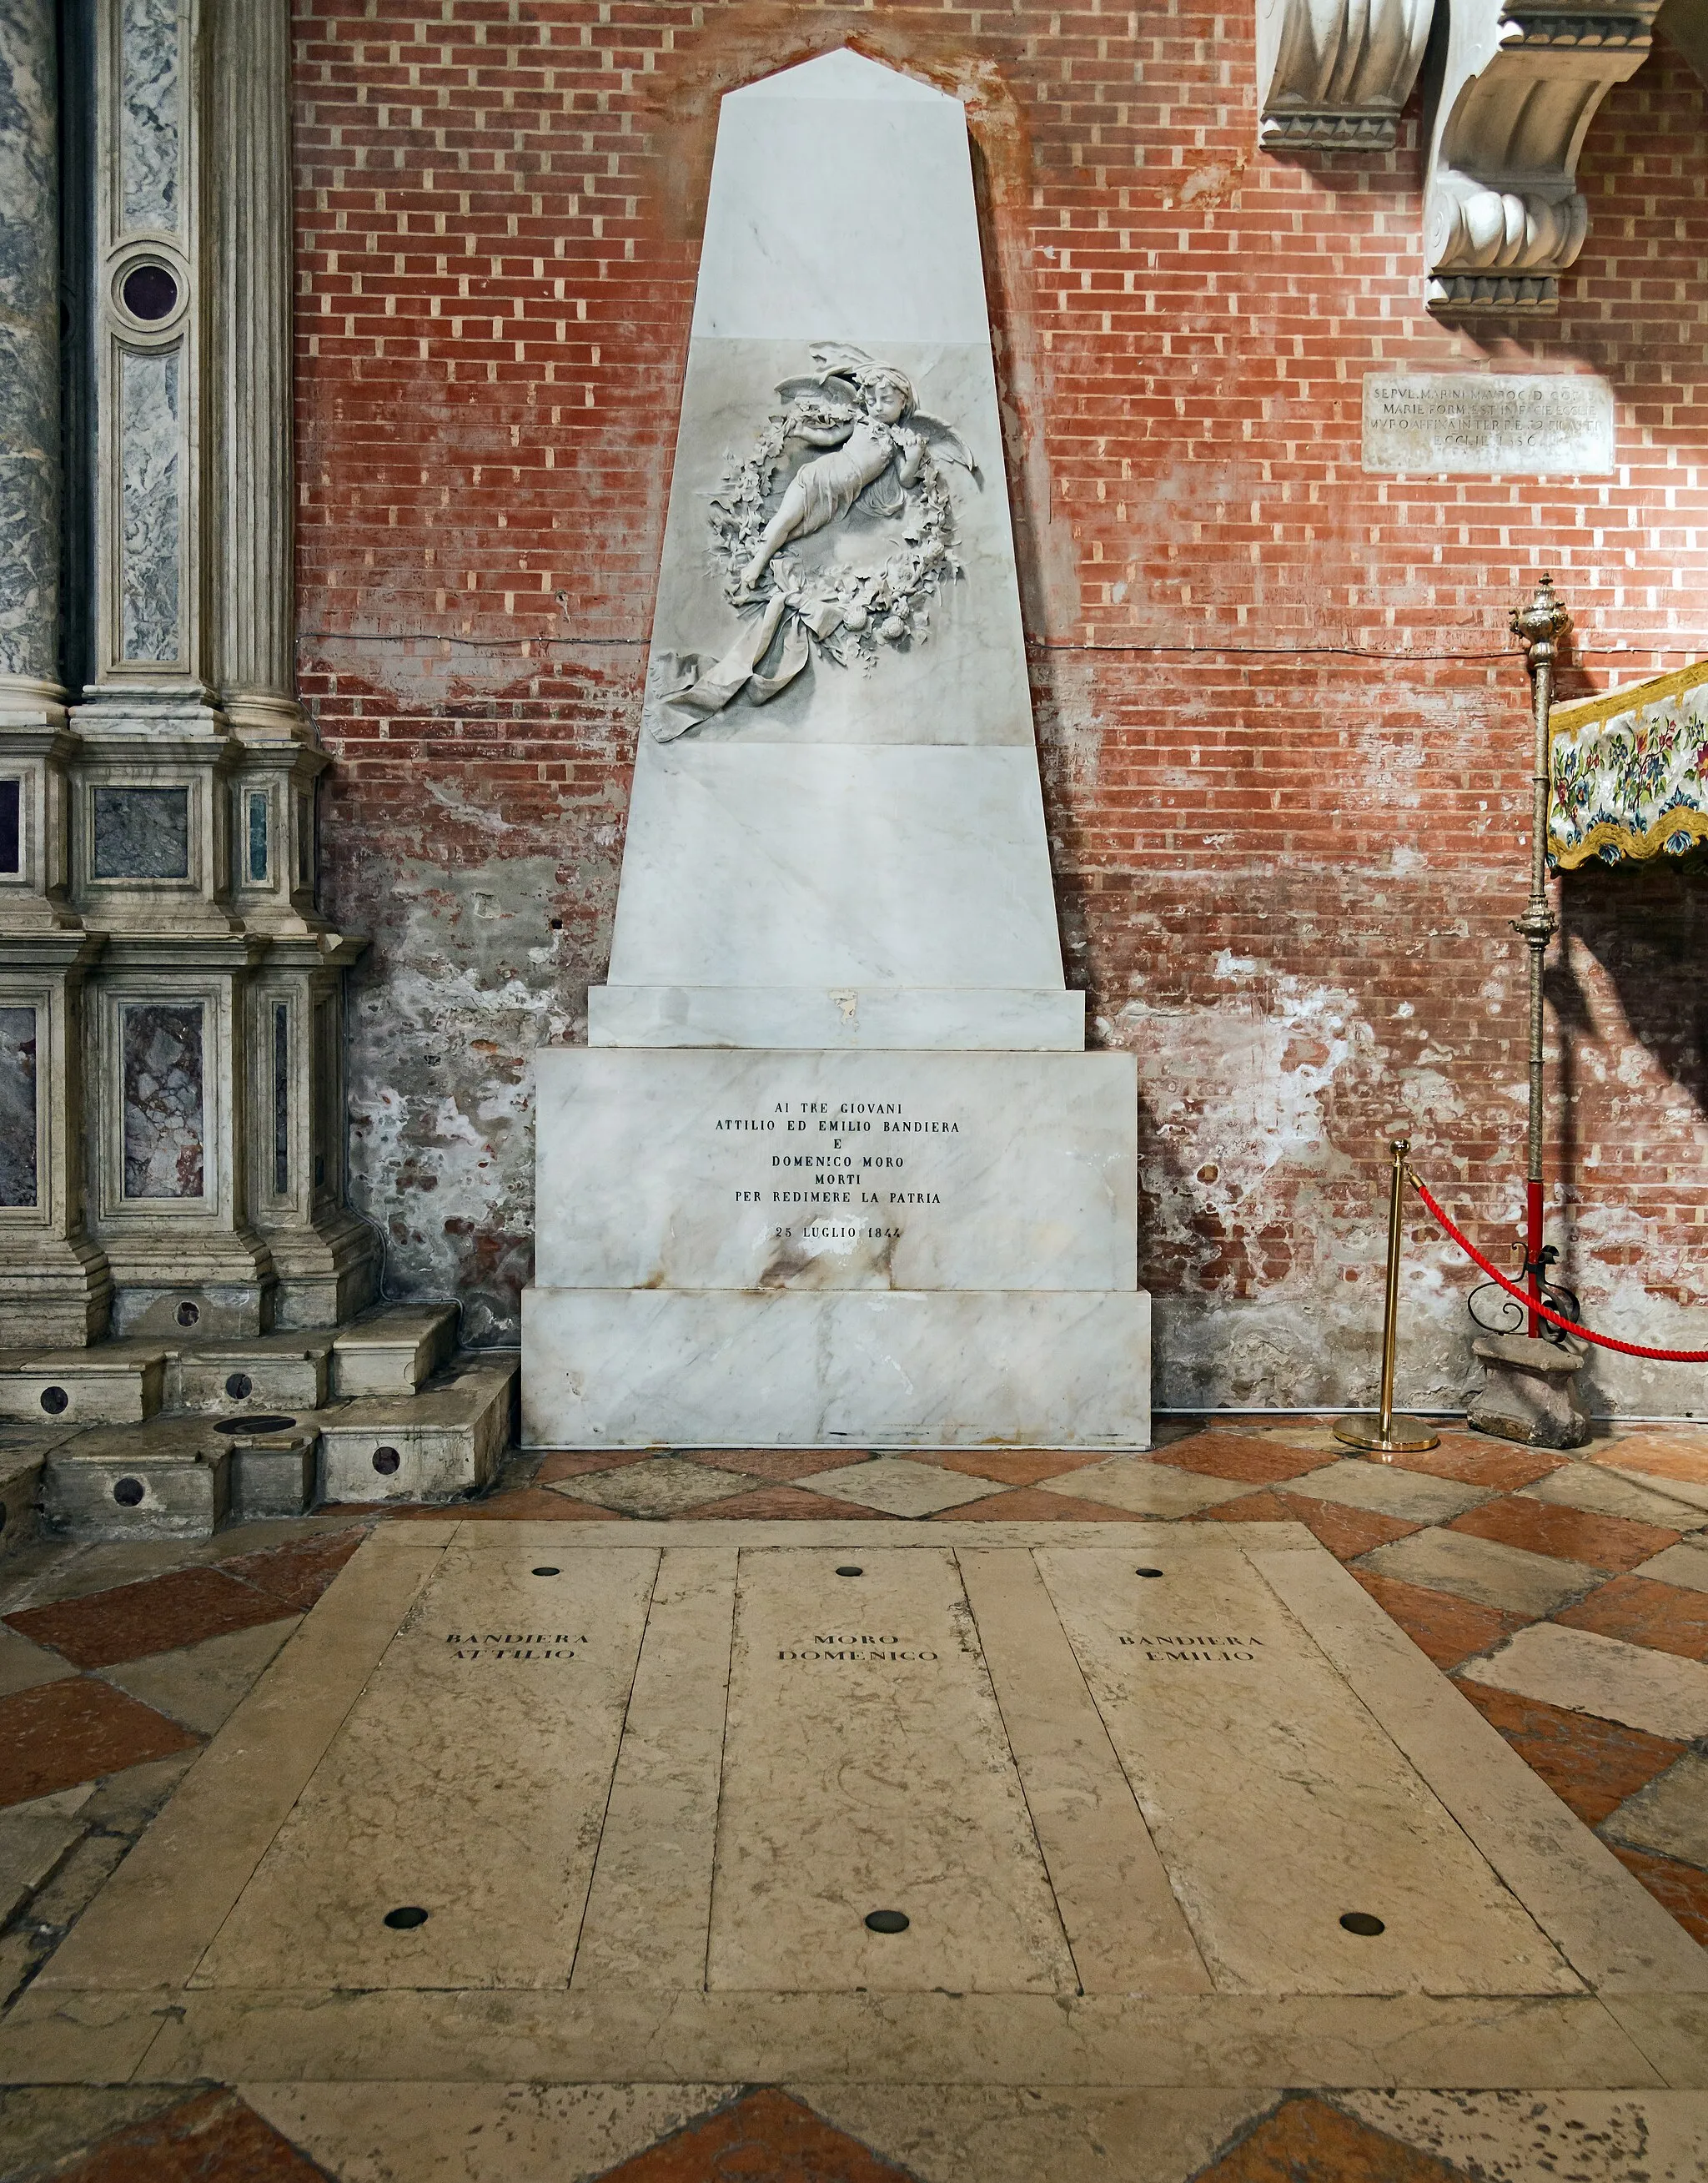 Photo showing: Santi Giovanni e Paolo in Venice. Monument to the Patriots Bandiera brothers and Moro Domenico, whose bodies were transported here in 1867.